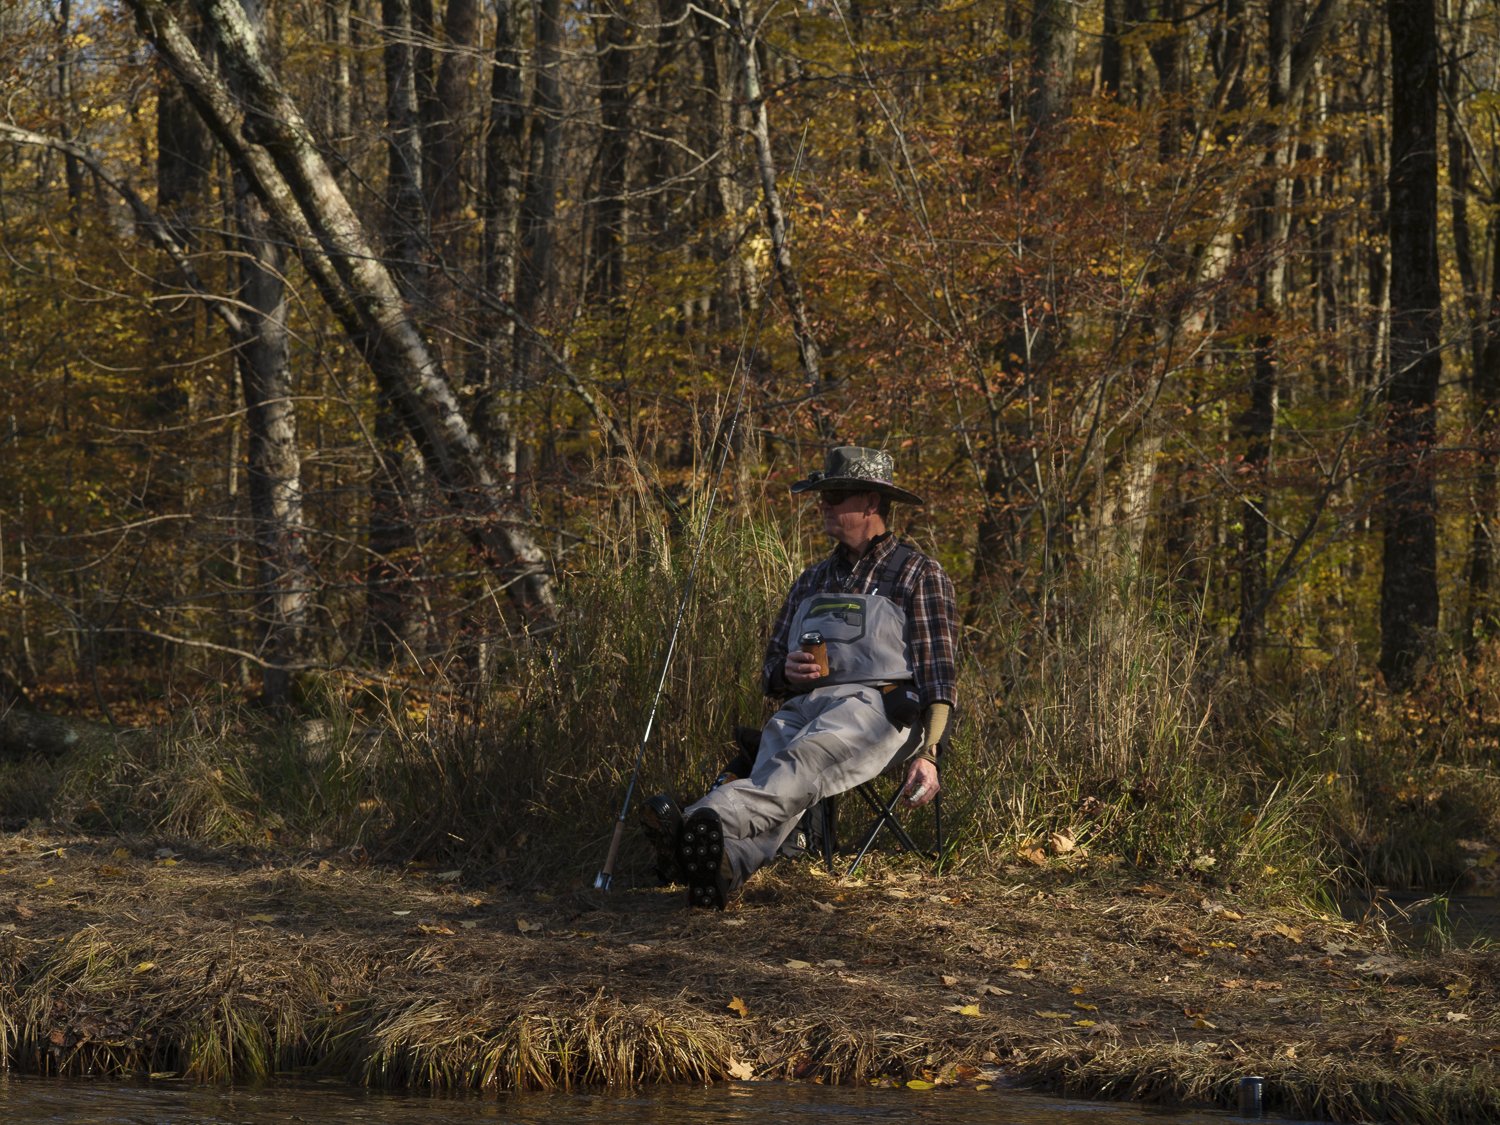  A fisherman takes a break and has a beverage on the Salmon River near Altmar, New York. Apart from trying to land a trophy catch, anglers can often be seen resting, napping, sipping, and enjoying makeshift outdoor lounges all along the riverside.   